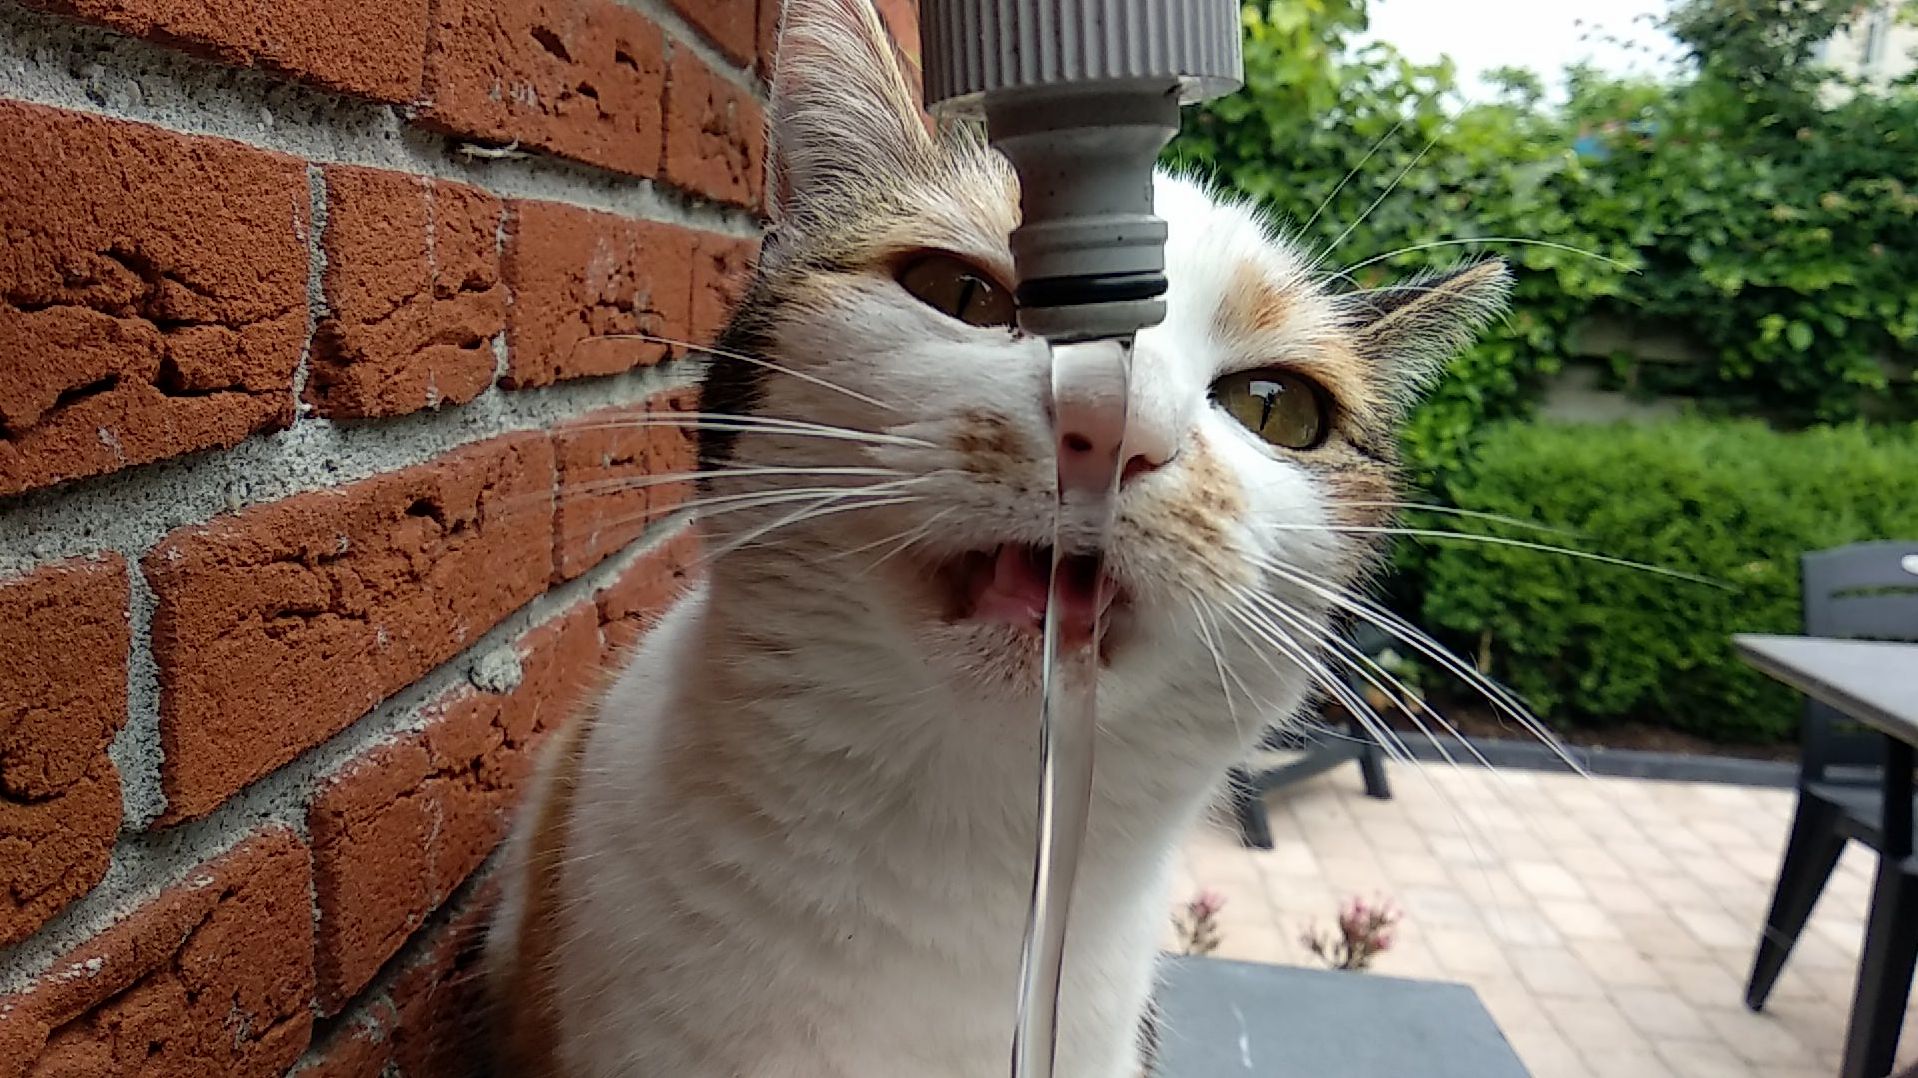 My dad installed a sink outside. this girl couldnt be any happier!